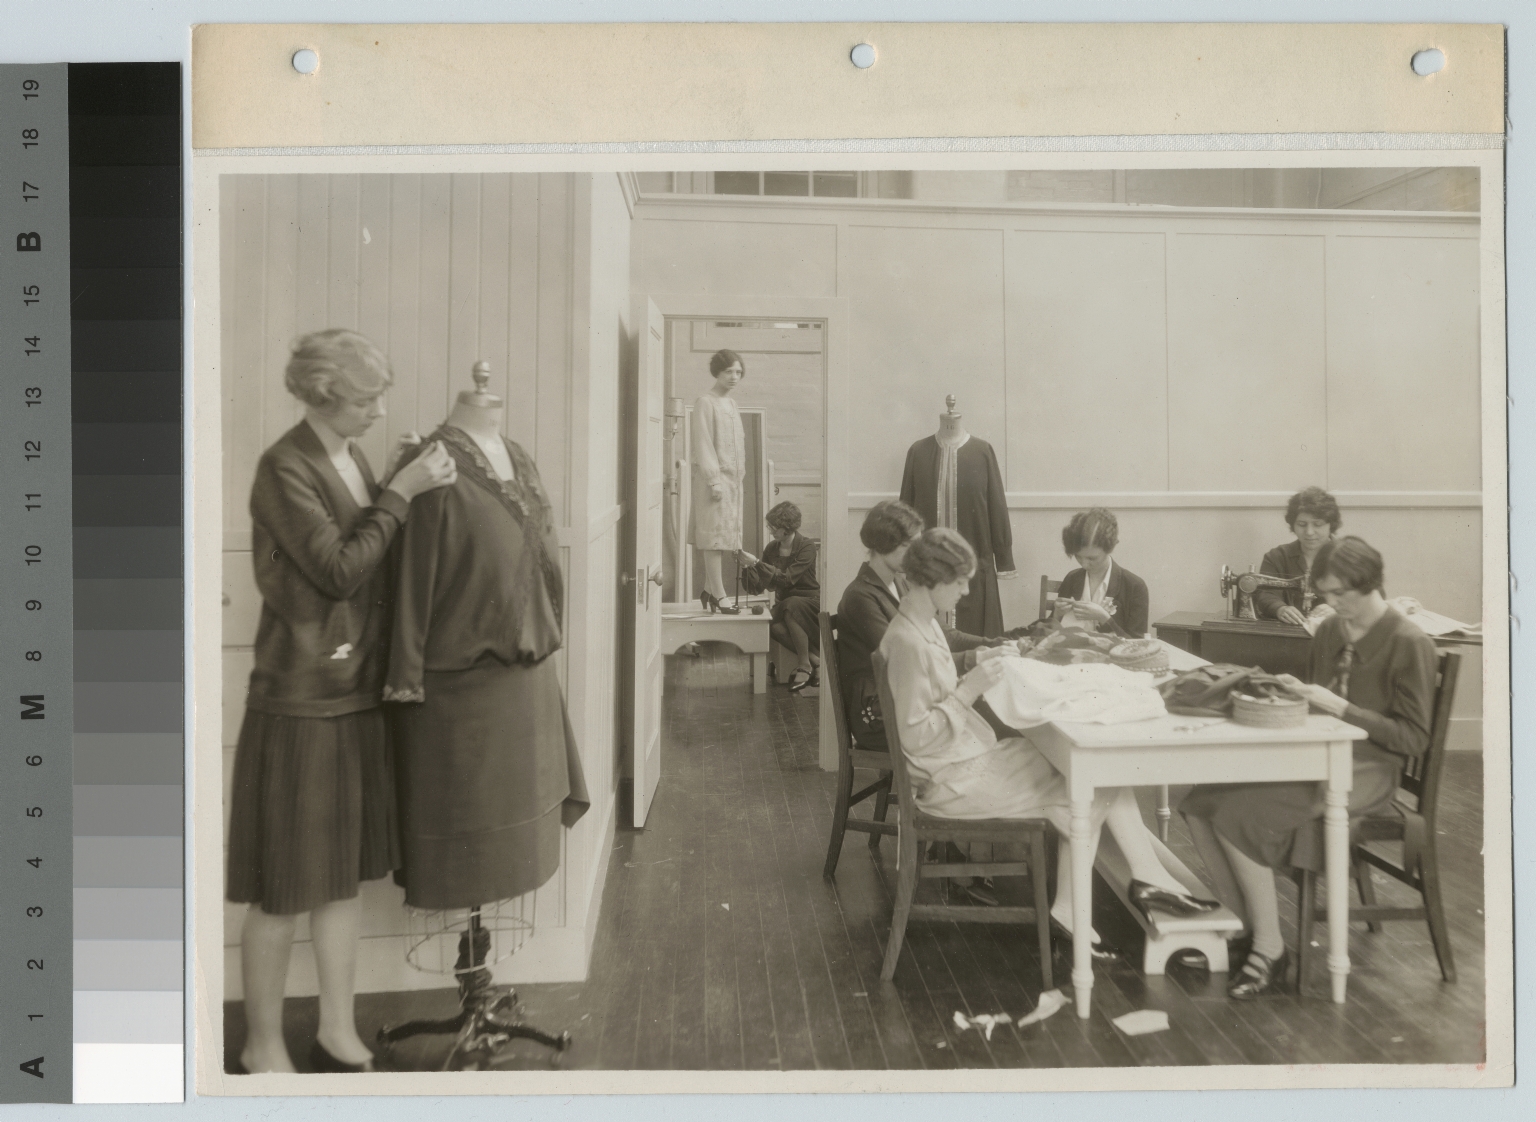 Design and dressmaking class, Department of Household Arts and Science, Rochester Athenaeum and Mechanics Institute [1920-1929]